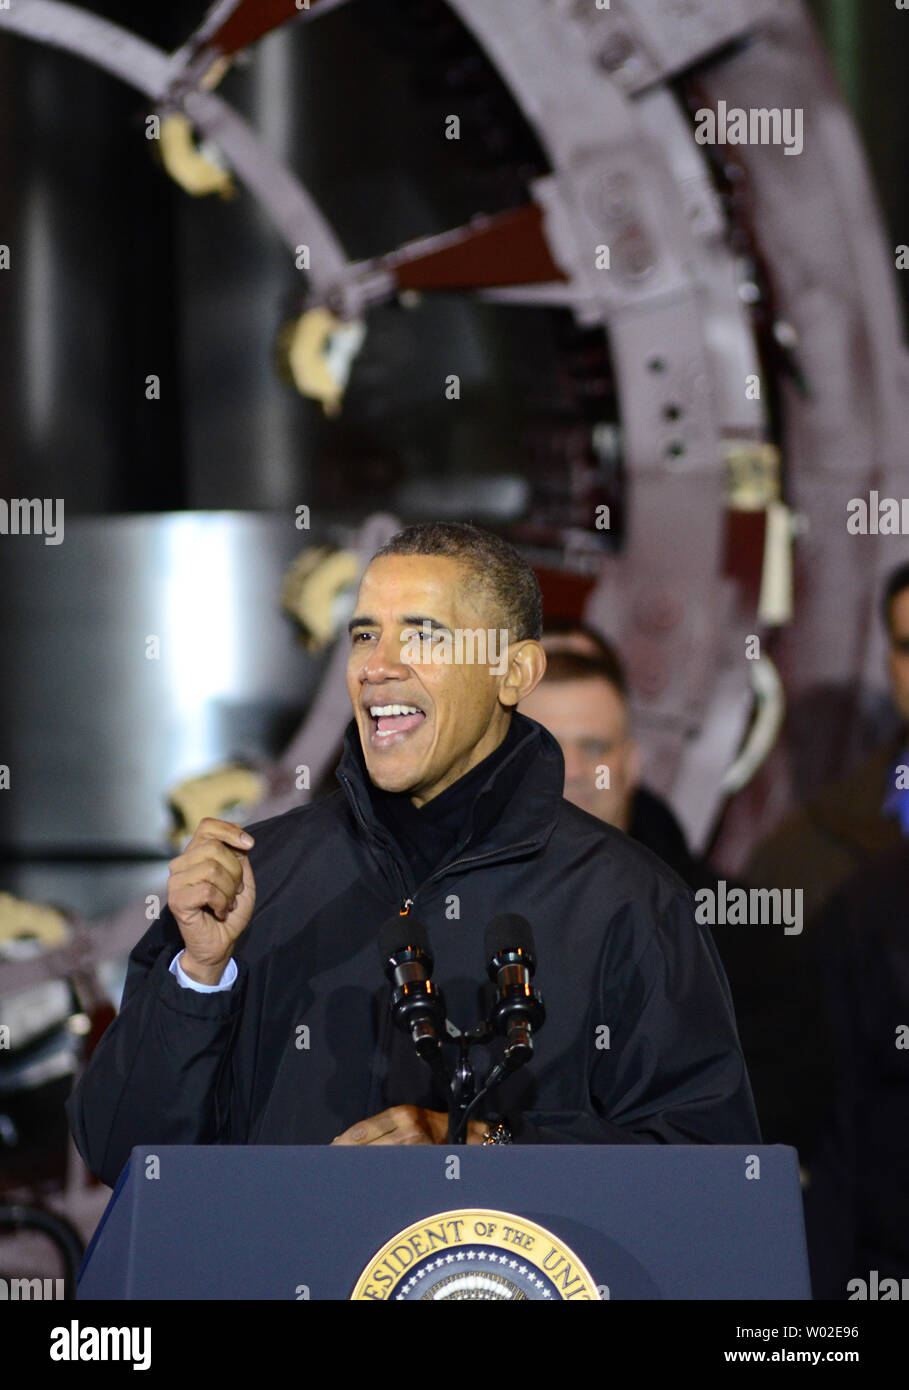 President Barack Obama addresses workers and guests at the U. S. Steel Irvin Plant in West Mifflin, Pennsylvania before signing a presidential memorandum for MyIRA, a new retirement plan, on January 29, 2014.   UPI/Archie Carpenter Stock Photo